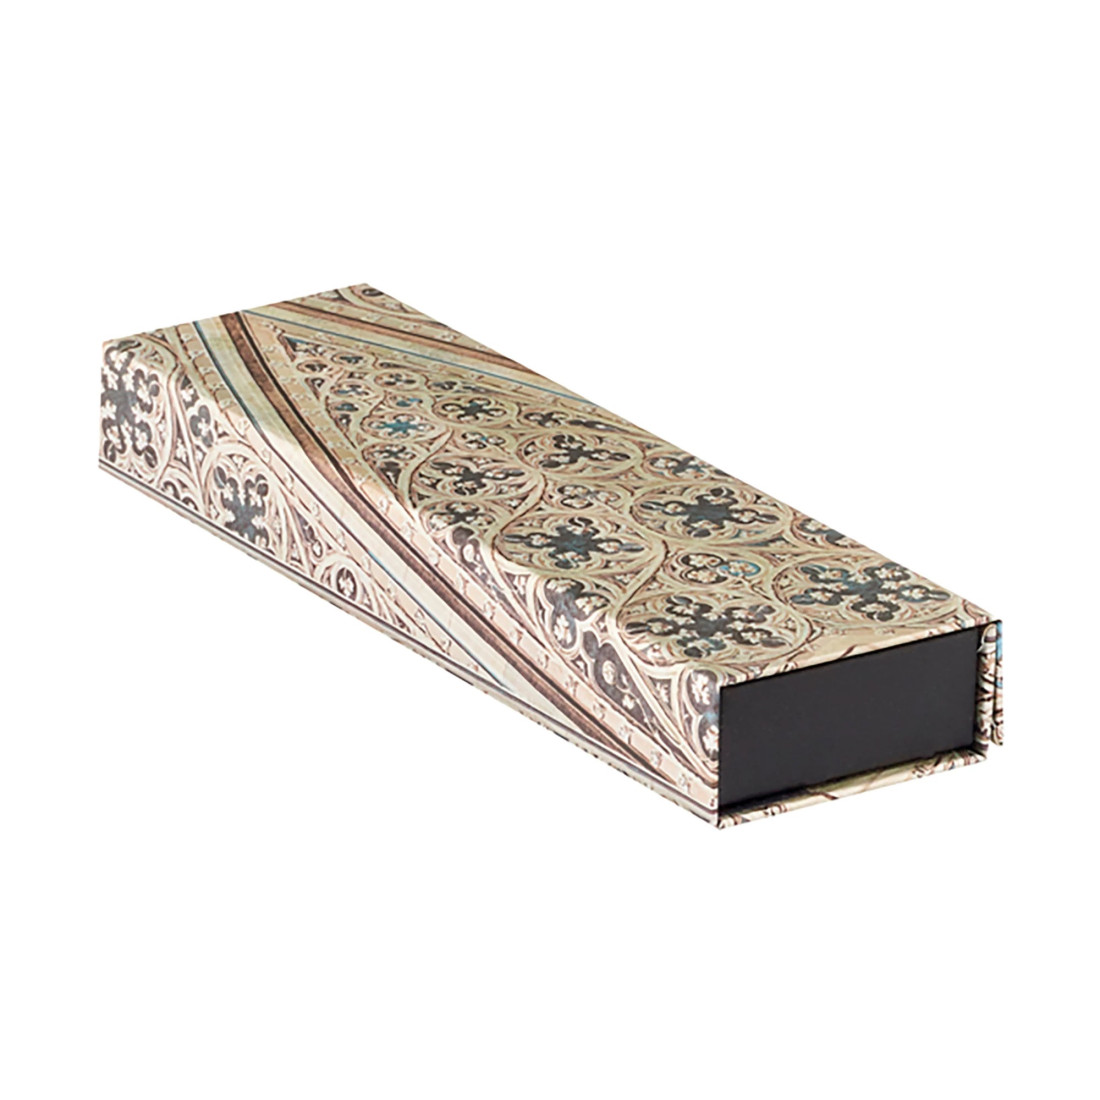 Paperblanks Pencil Case Vault of the Milan Cathedral